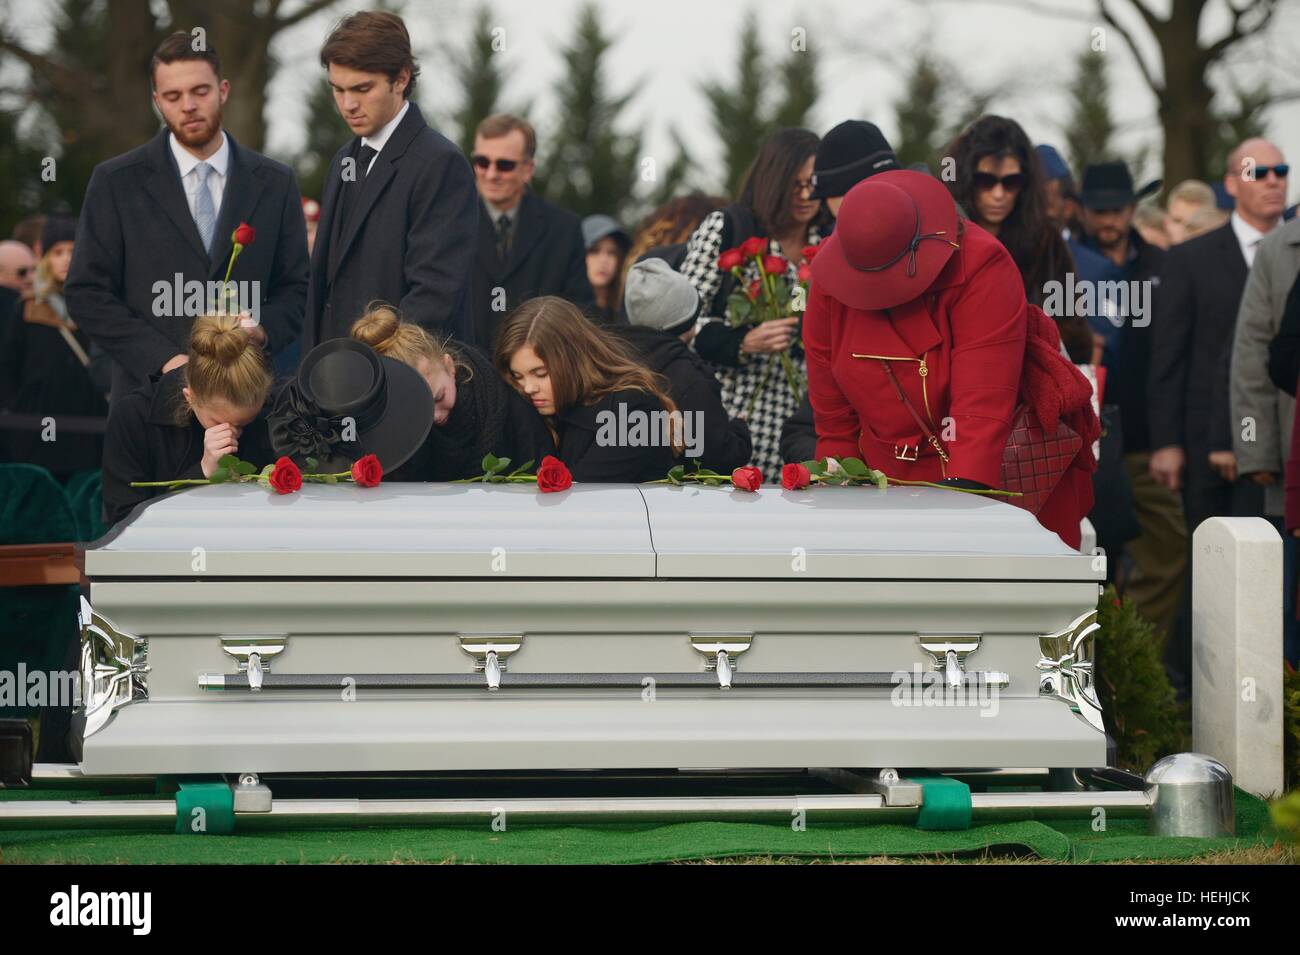 The family of U.S. Air Force soldier Troy Gilbert place roses on his casket during his interment service at the Arlington National Cemetery December 19, 2016 in Arlington, Virginia. Gilbert was killed in 2006 when his F-16C Fighting Falcon aircraft crashed near Baghdad, Iraq during a combat mission. Stock Photo